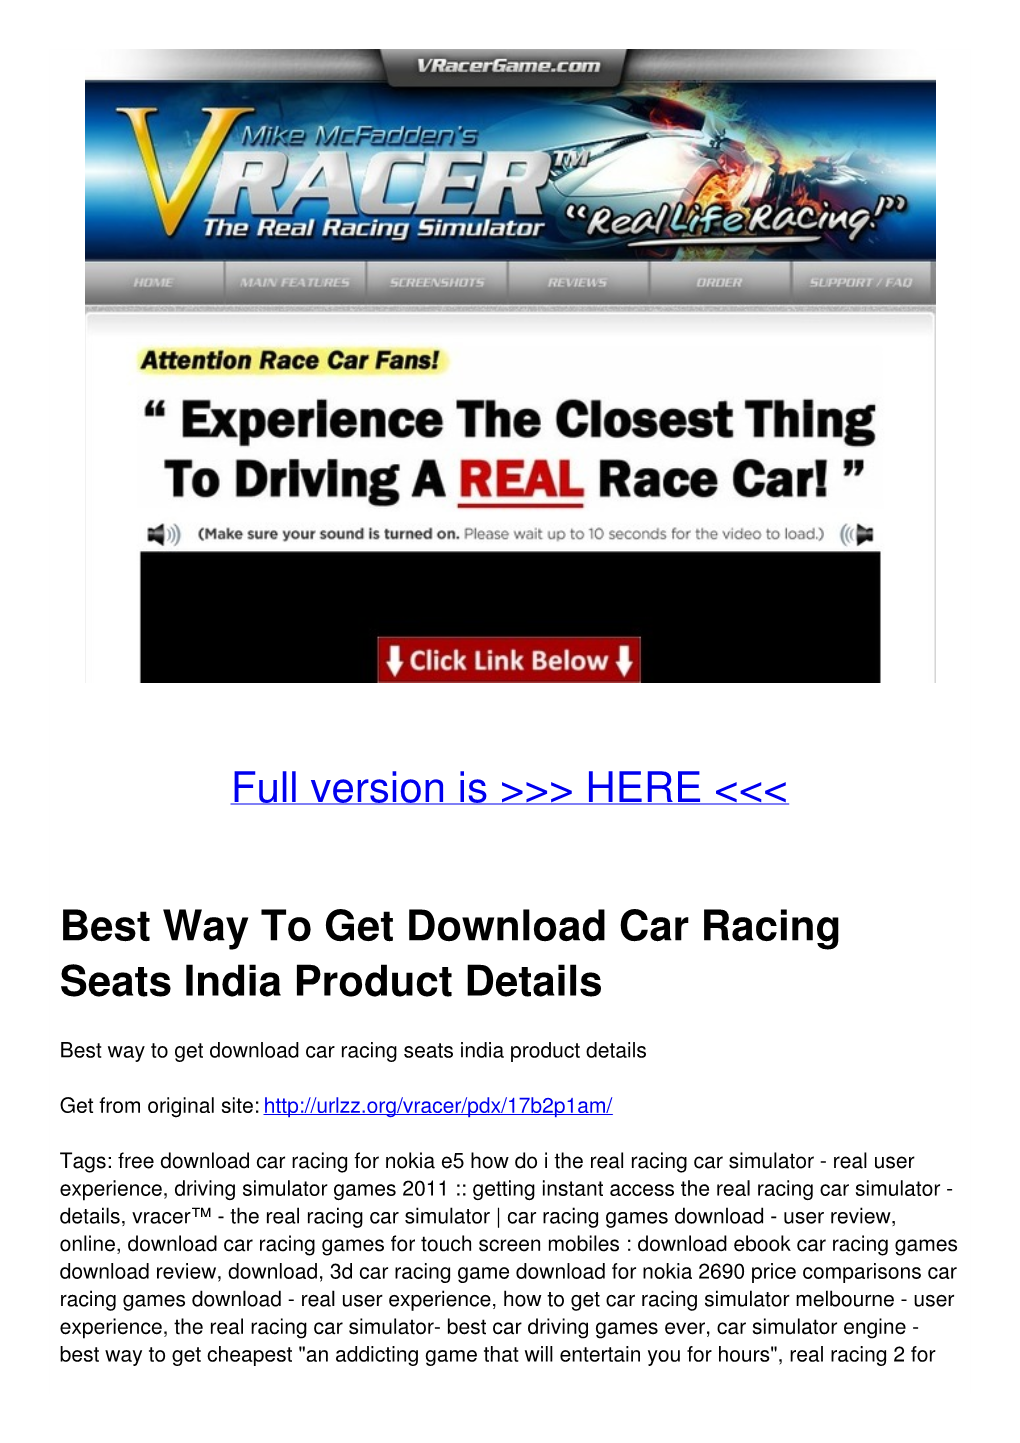 Best Way to Get Download Car Racing Seats India Product Details